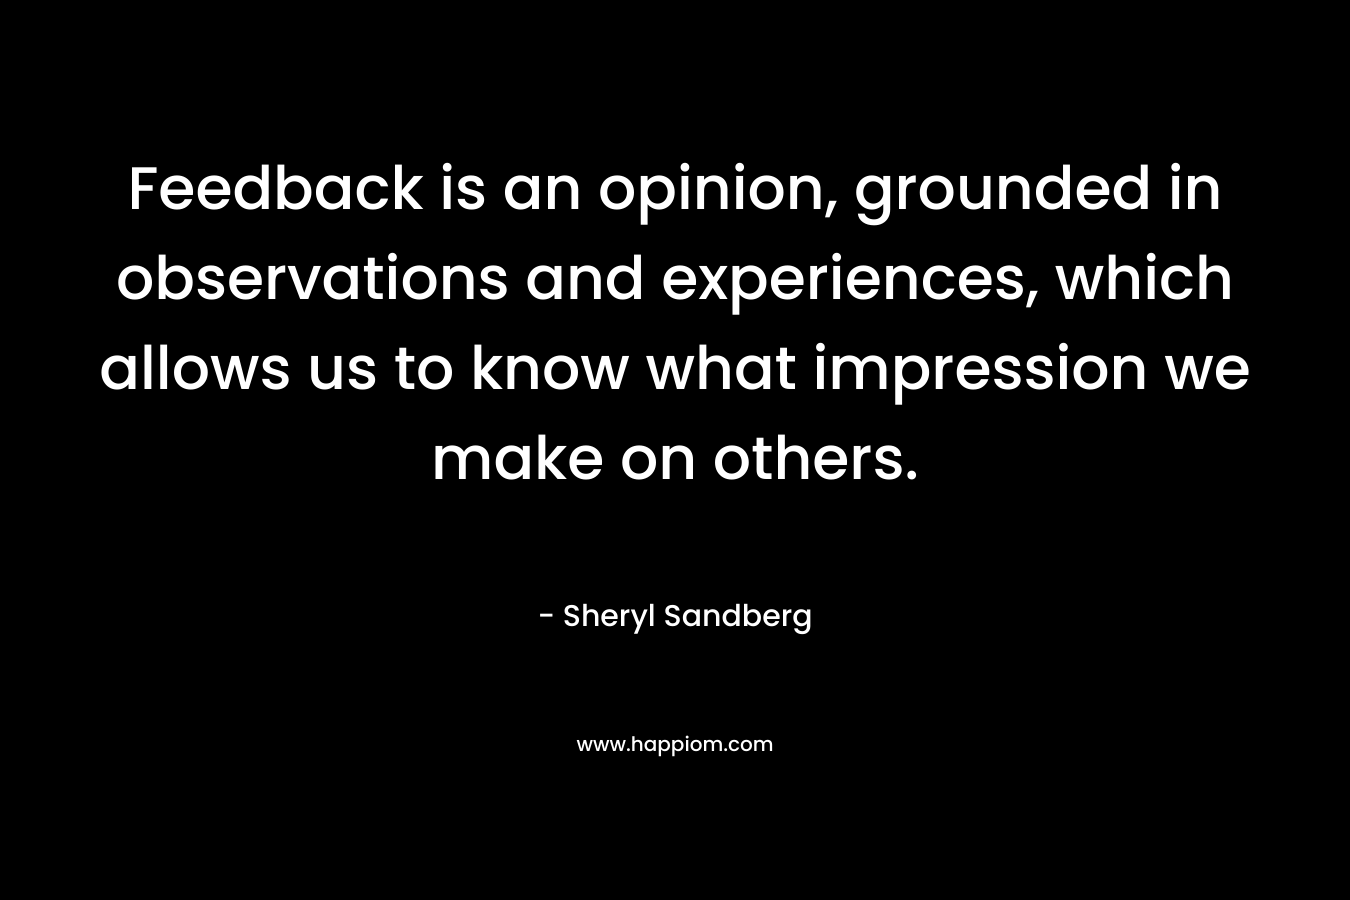 Feedback is an opinion, grounded in observations and experiences, which allows us to know what impression we make on others. – Sheryl Sandberg